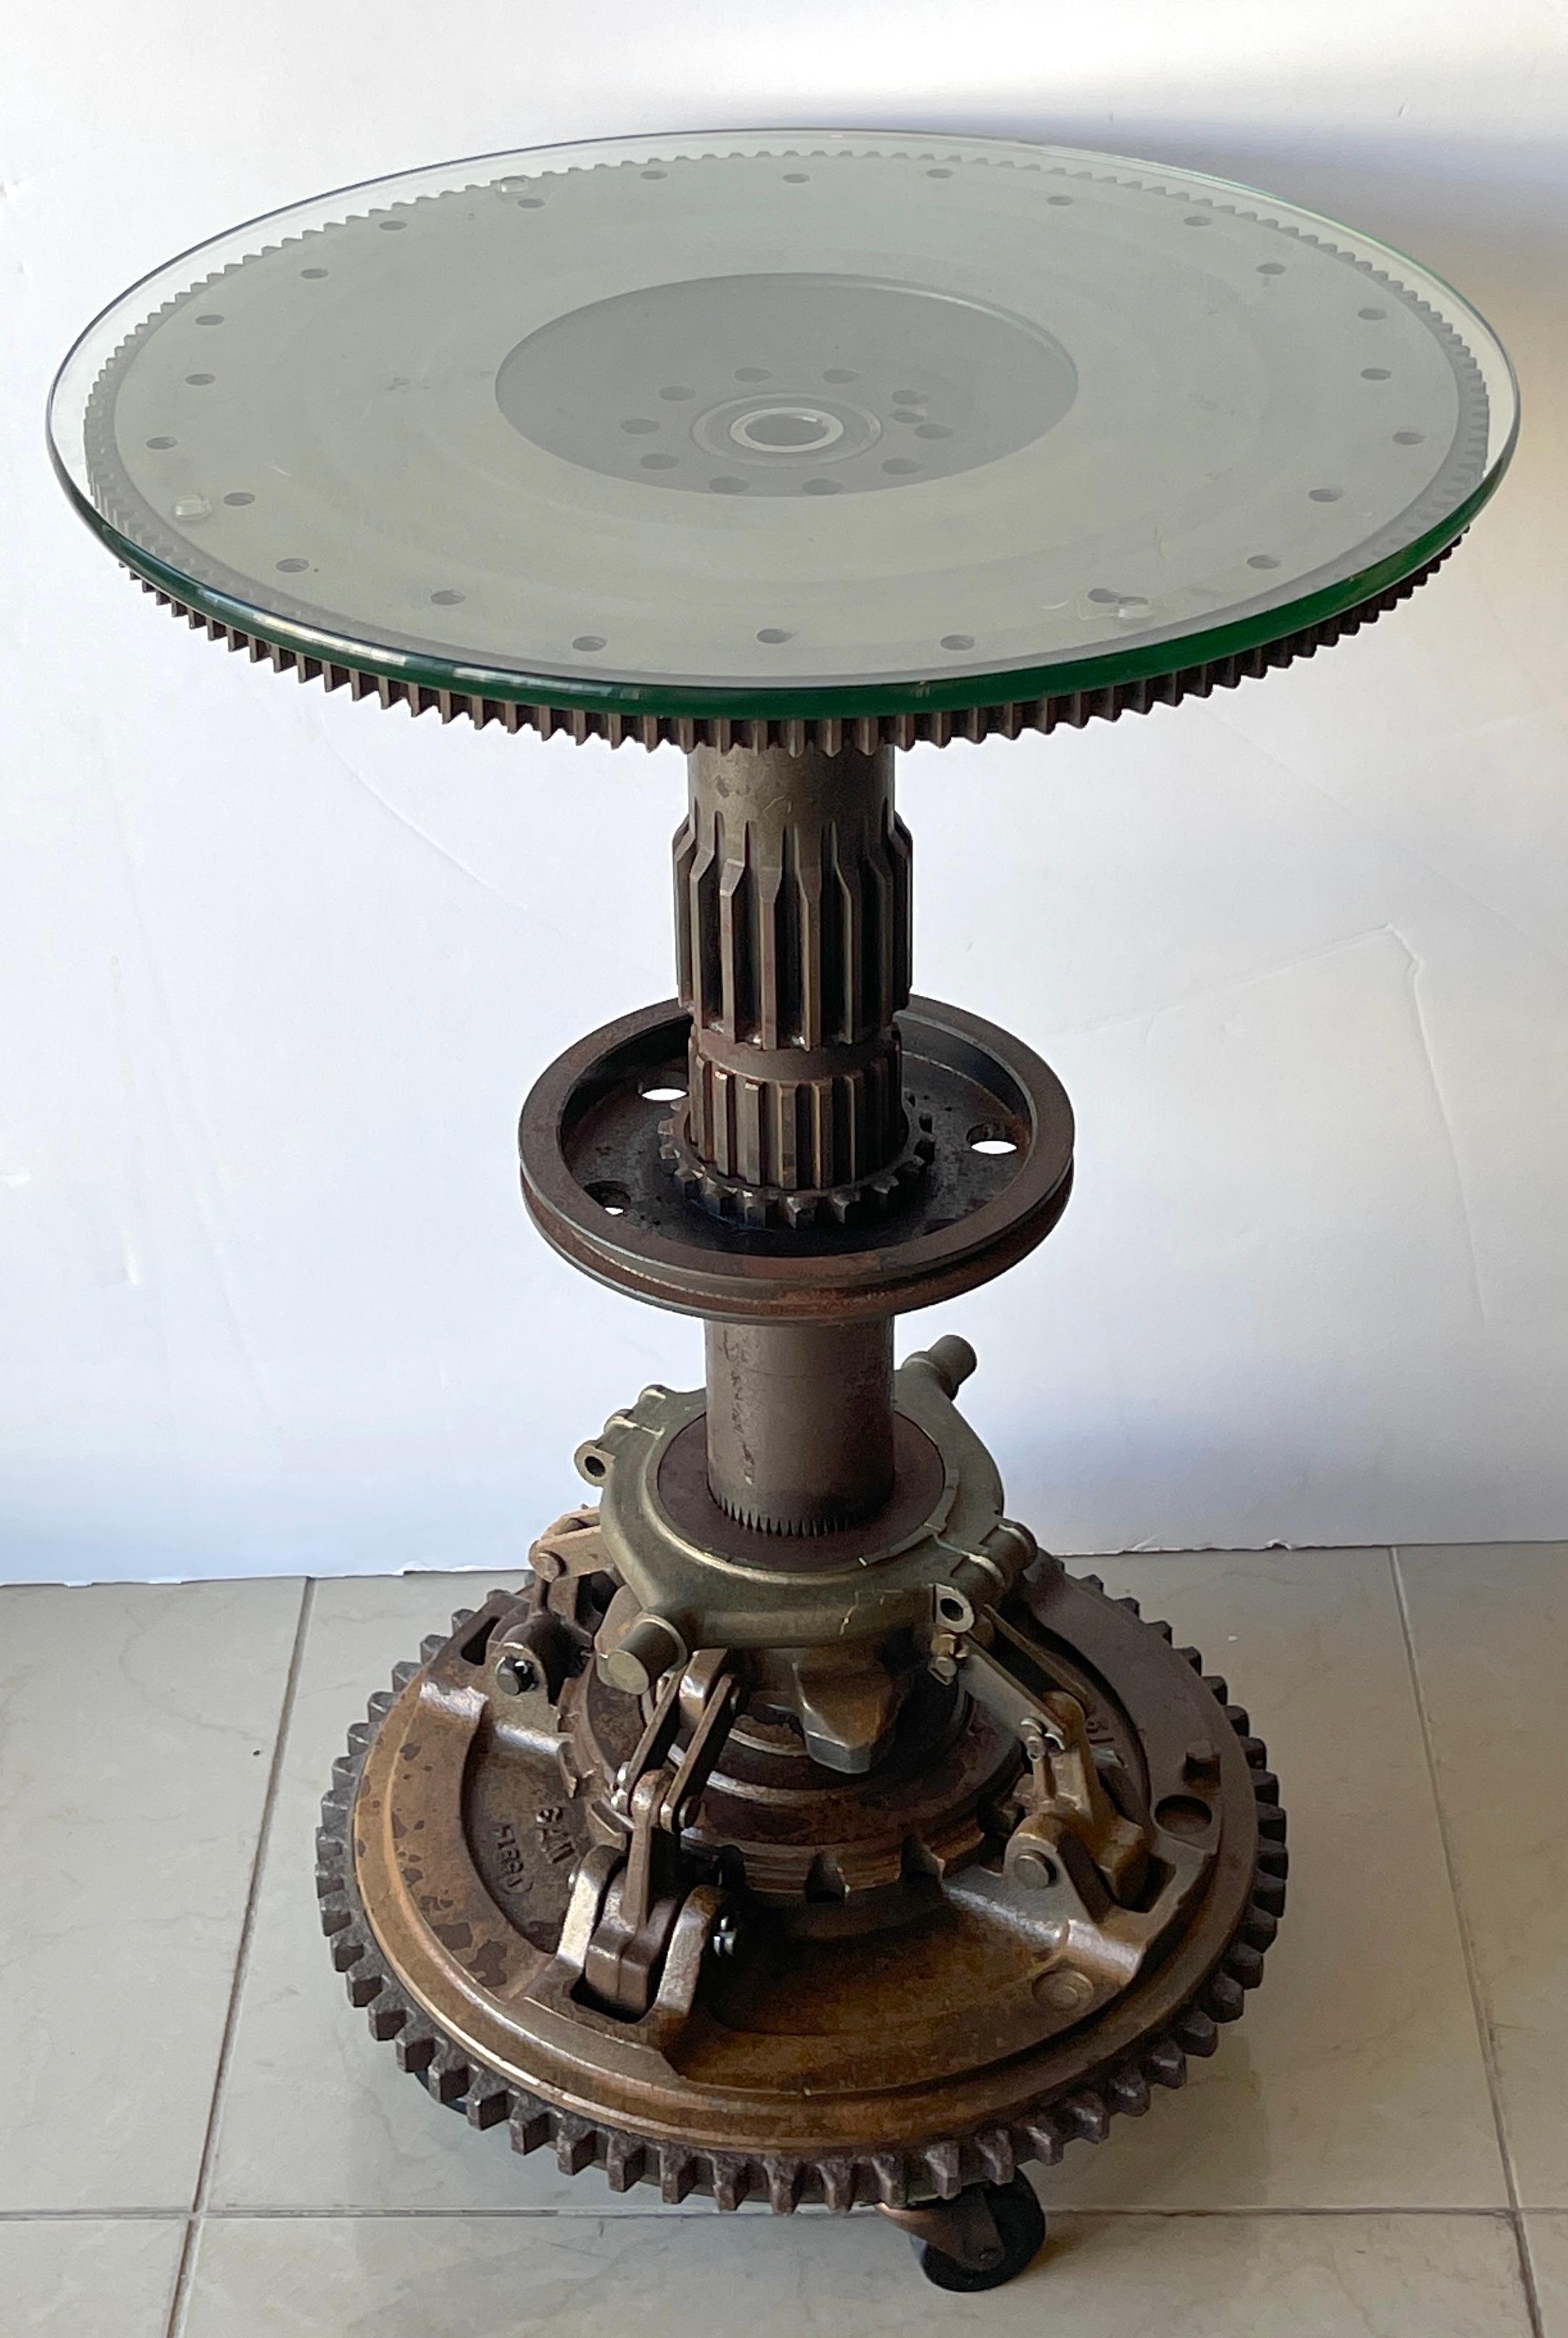 Aeronautical Camshaft Gueridon Gueridon, C. 1990s

Made of selected group of vintage authentic plane cam shaft parts, This is a substantial table, weighs approximately 100-150 pounds. The table is manageable and easy to move since it's supported